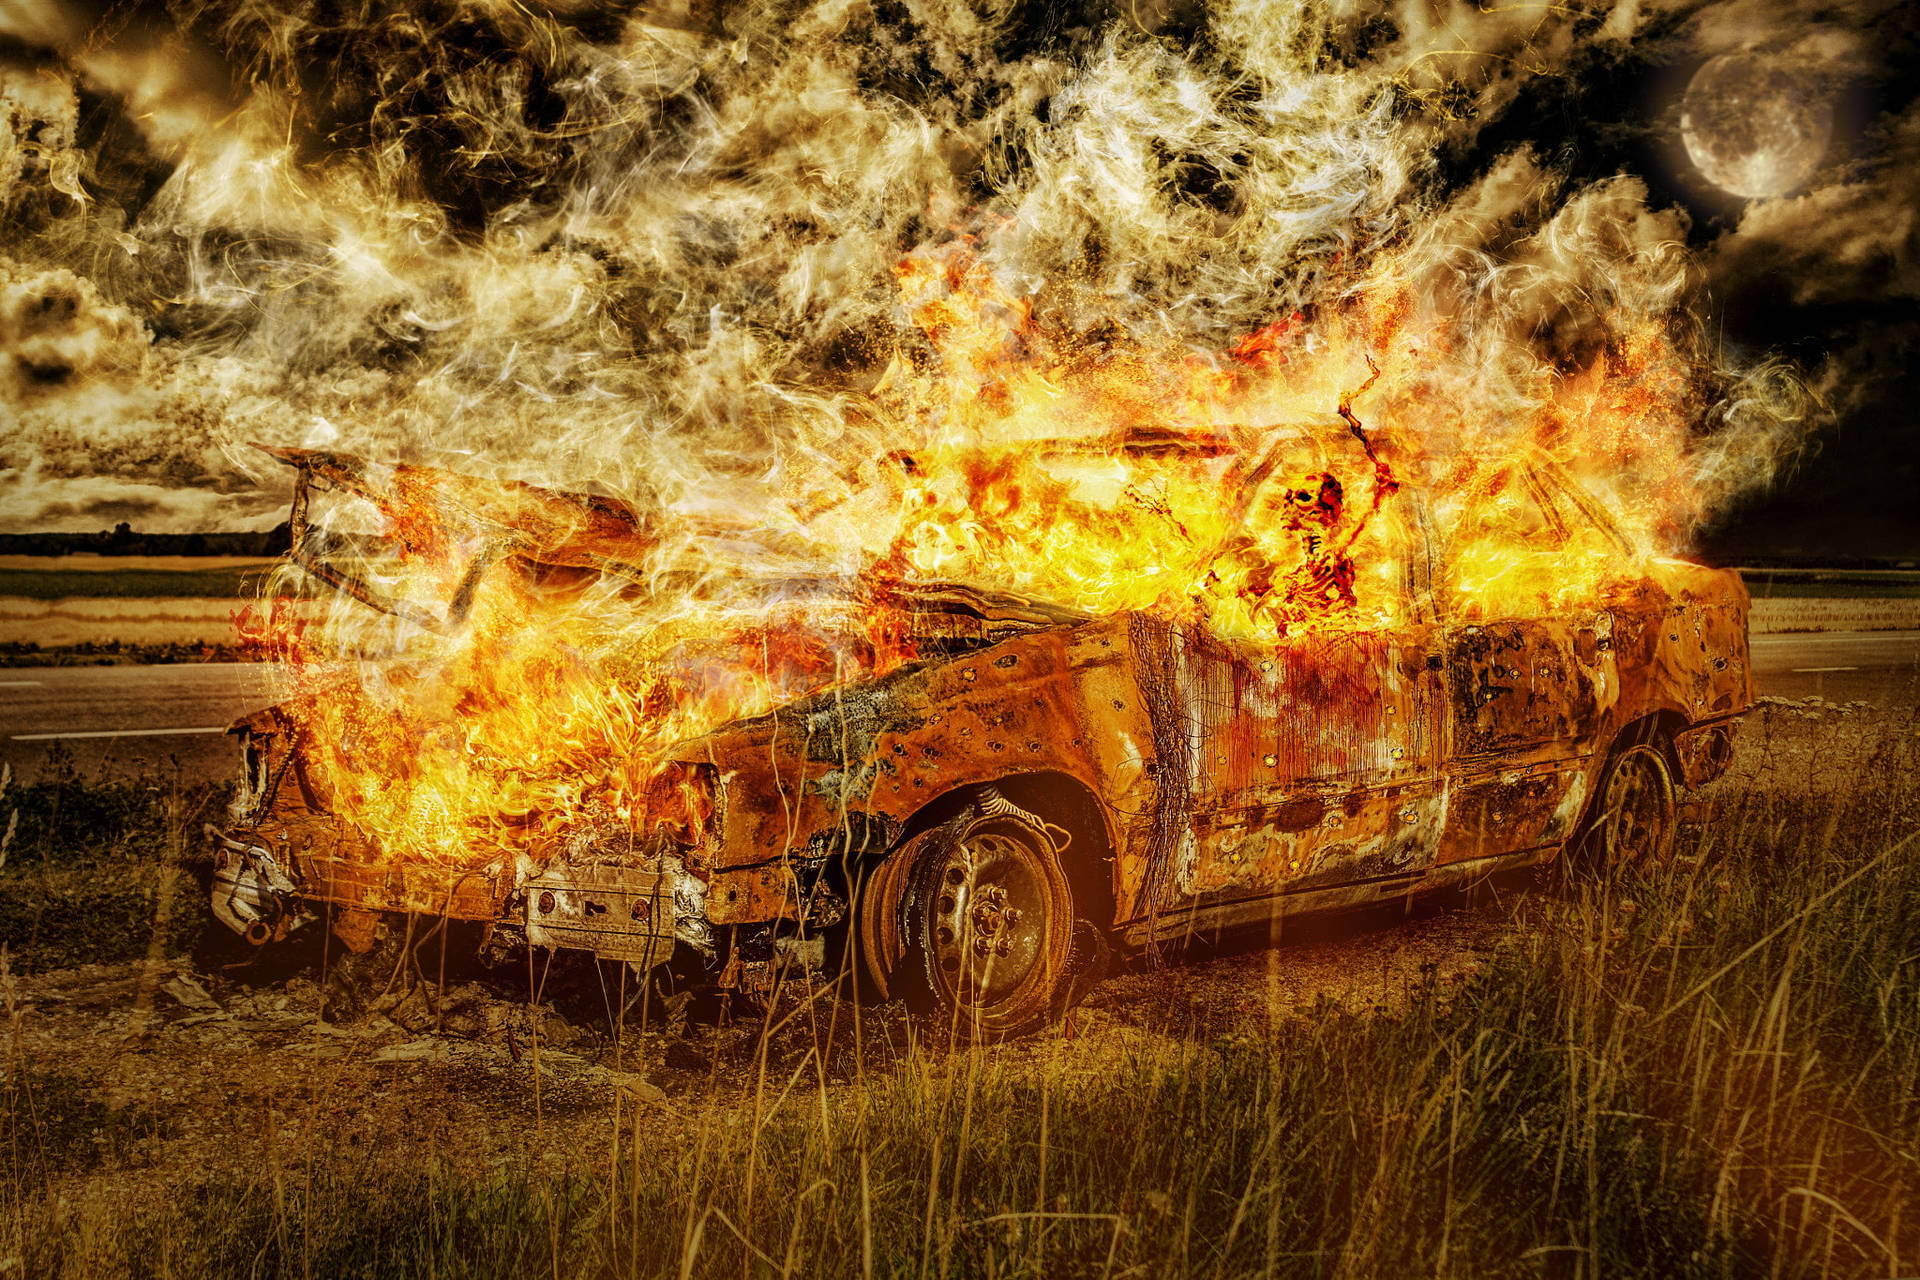 Burning Fire Car With Skeleton